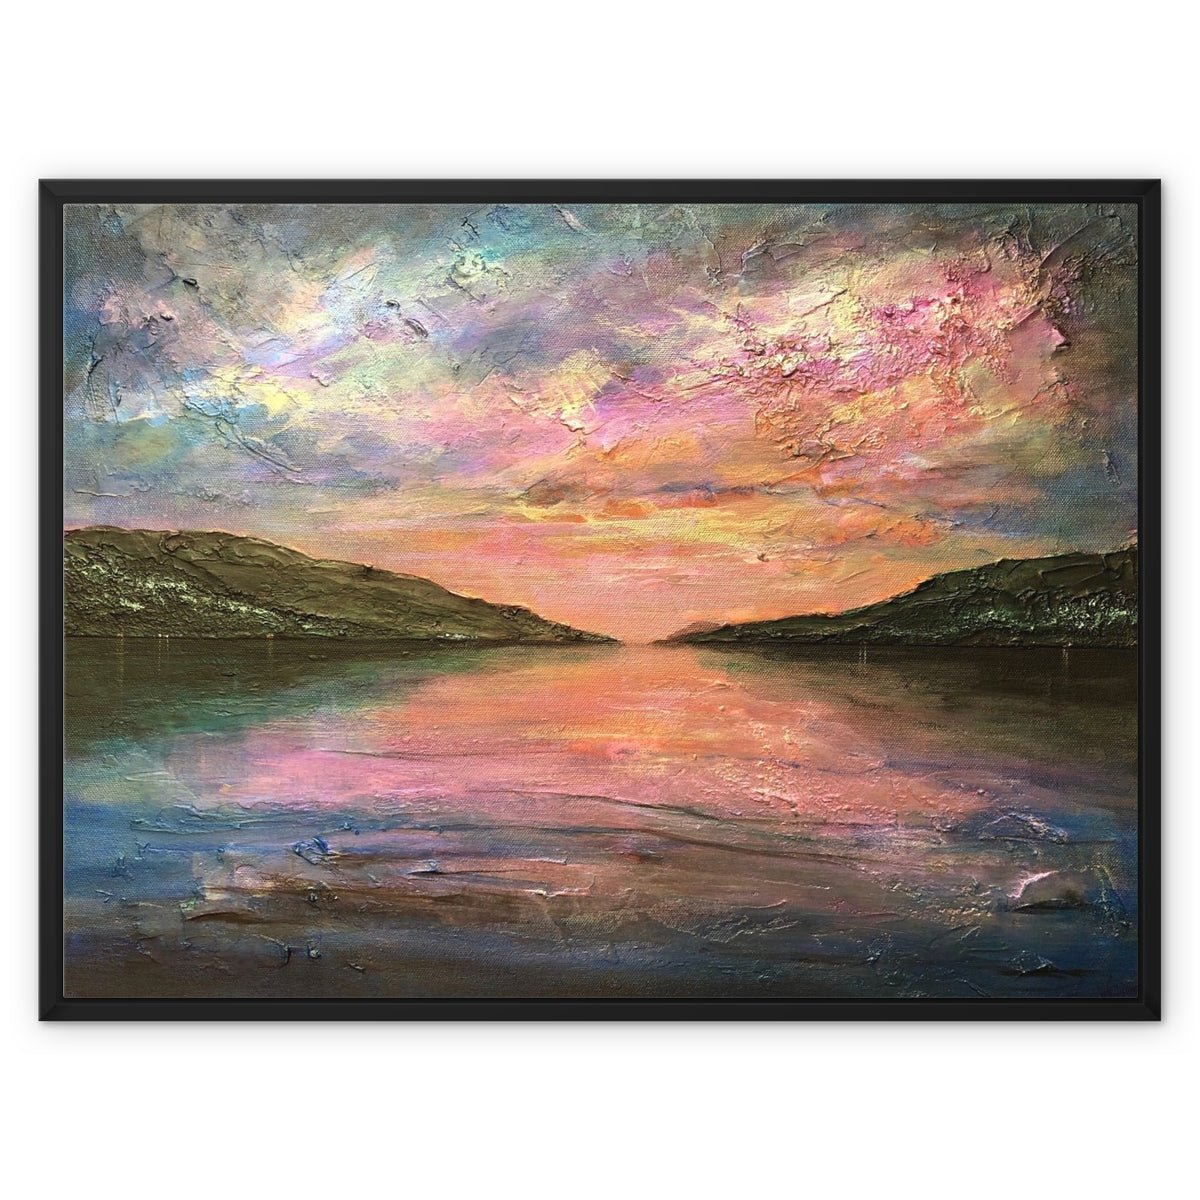 Loch Ness Dawn Painting | Framed Canvas From Scotland-Floating Framed Canvas Prints-Scottish Lochs & Mountains Art Gallery-32"x24"-Black Frame-Paintings, Prints, Homeware, Art Gifts From Scotland By Scottish Artist Kevin Hunter